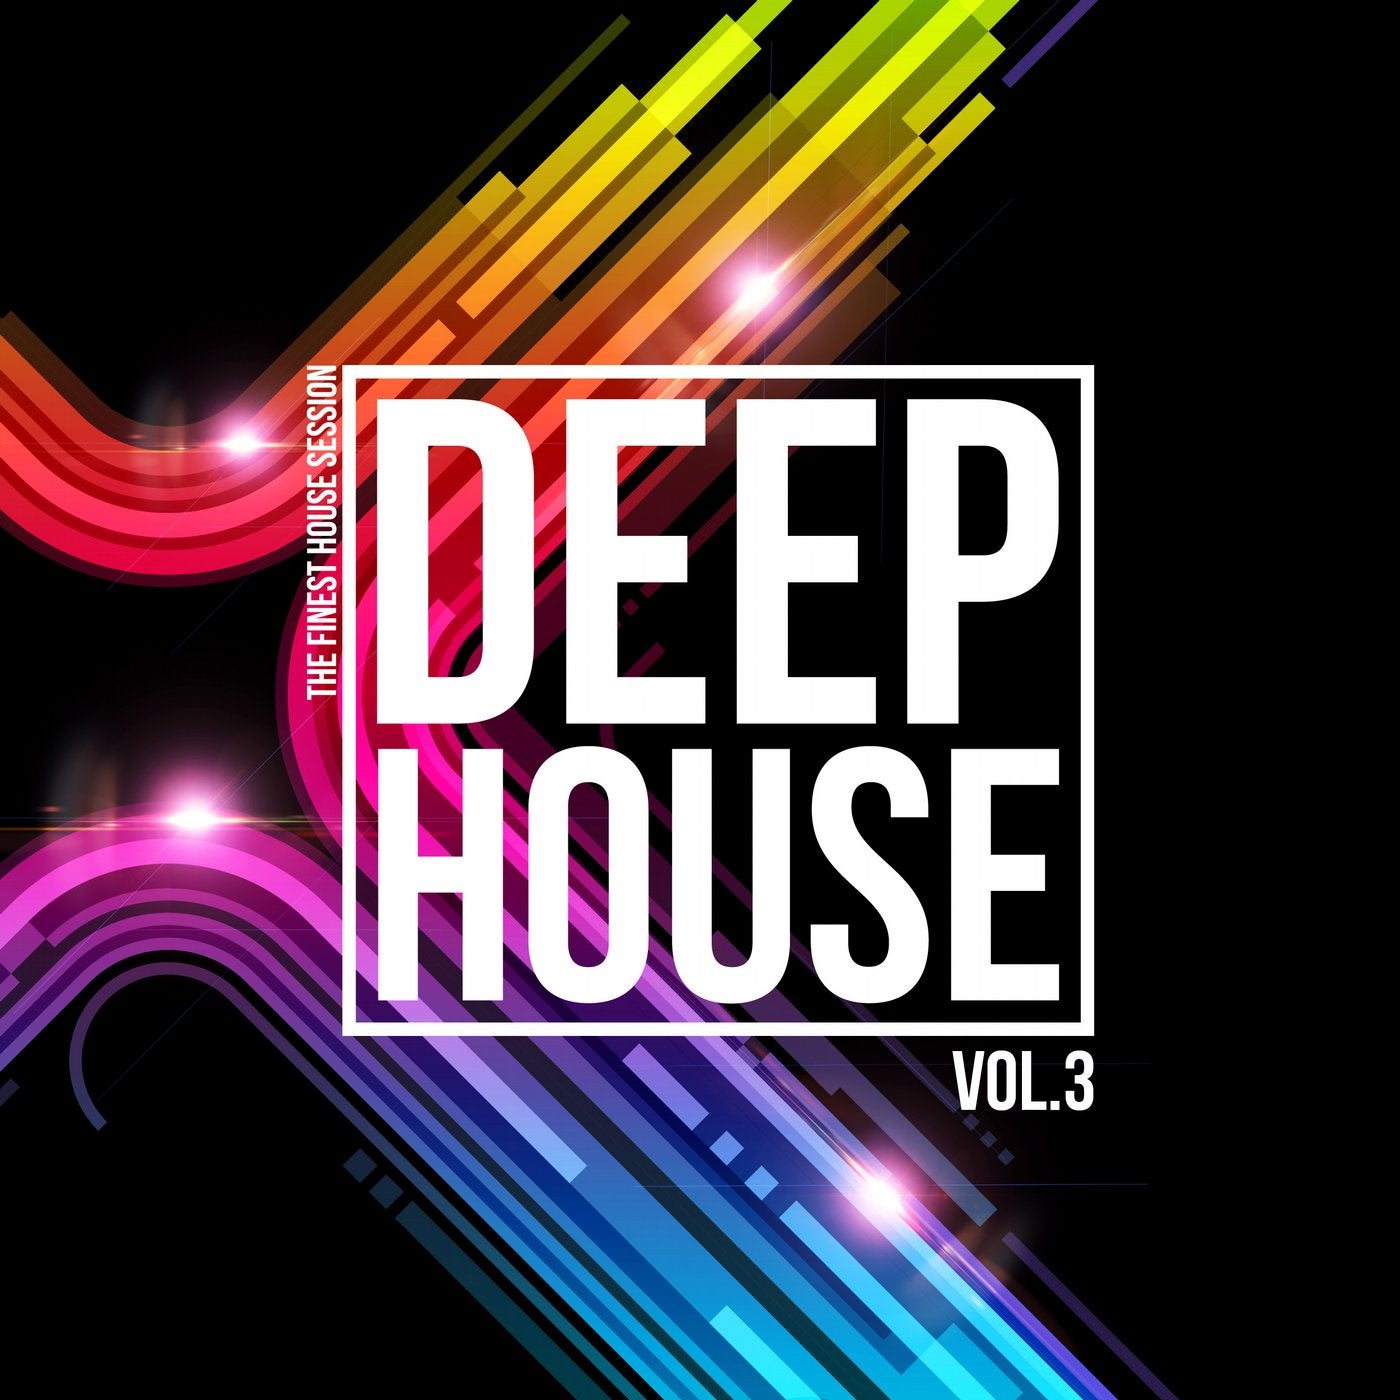 Deep House Vol. 3 - The Finest House Session